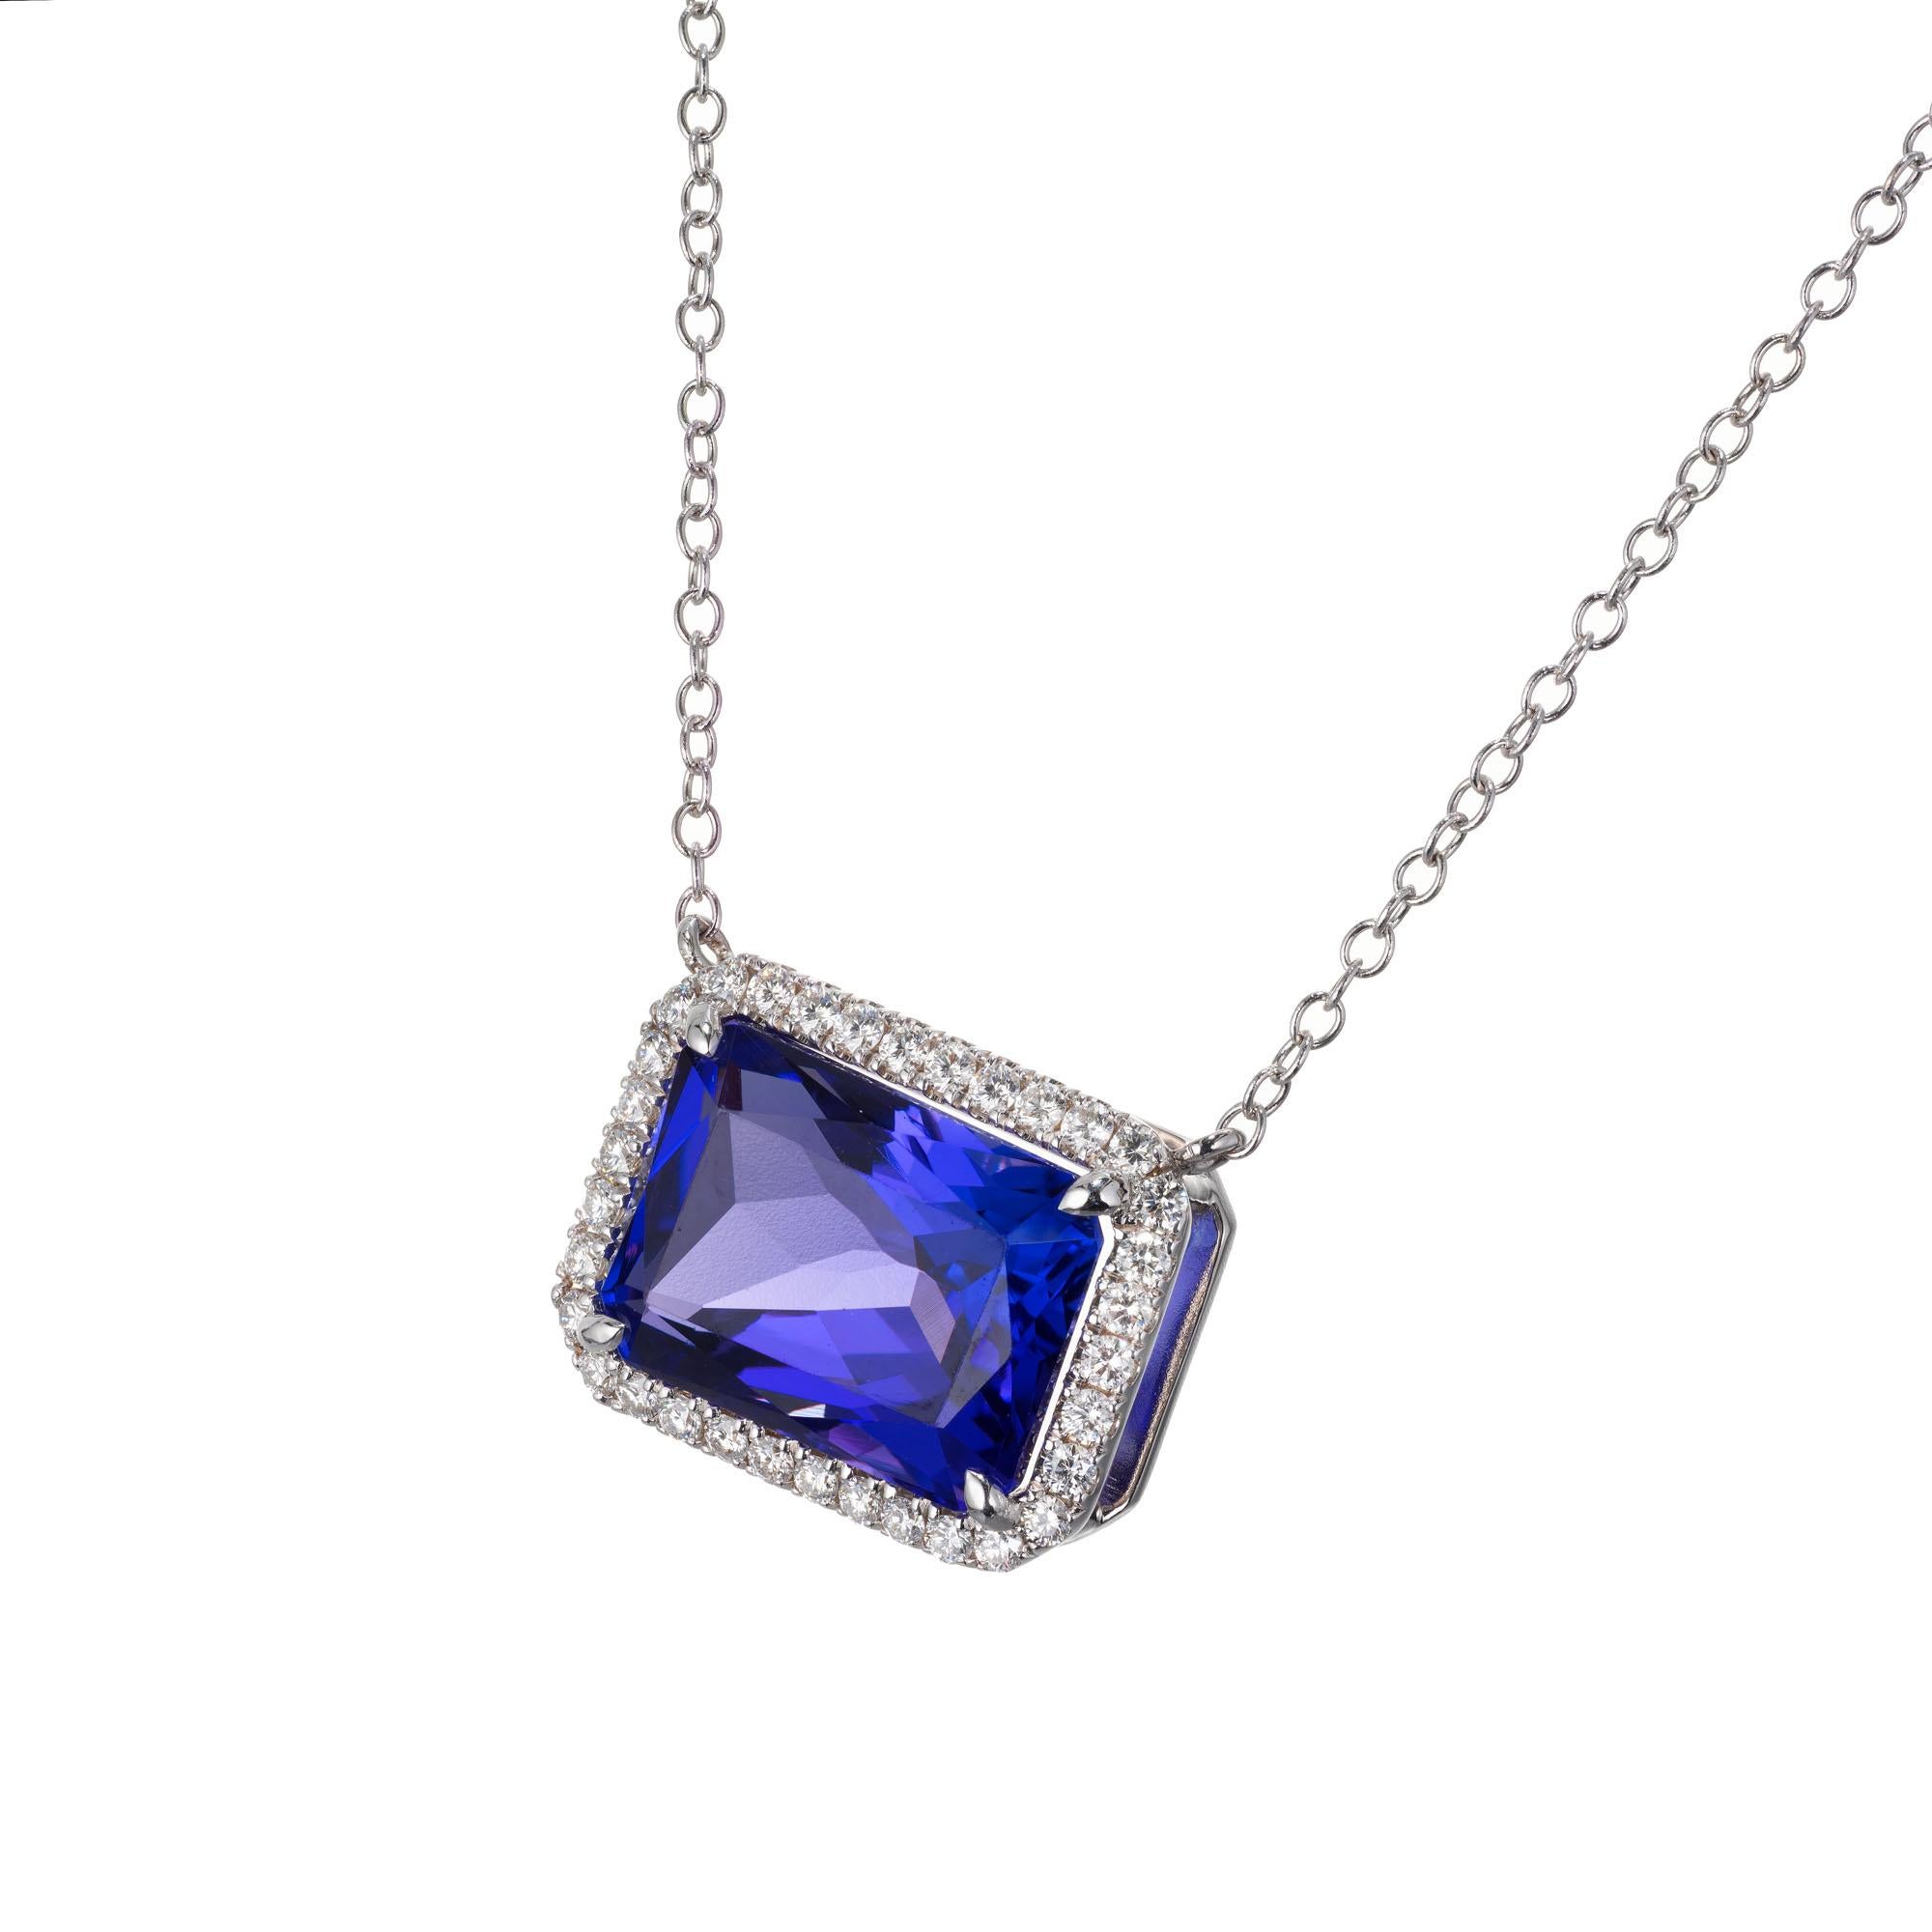 Rectangular tanzanite and diamond pendant necklace. Blue tanzanite with a halo of round diamonds in 18k white gold. Created in the Peter Suchy Workshop.  

1 rectangular cut blue tanzanite VS, approx. 9.26cts
34 round brilliant cut diamonds G-H VS,